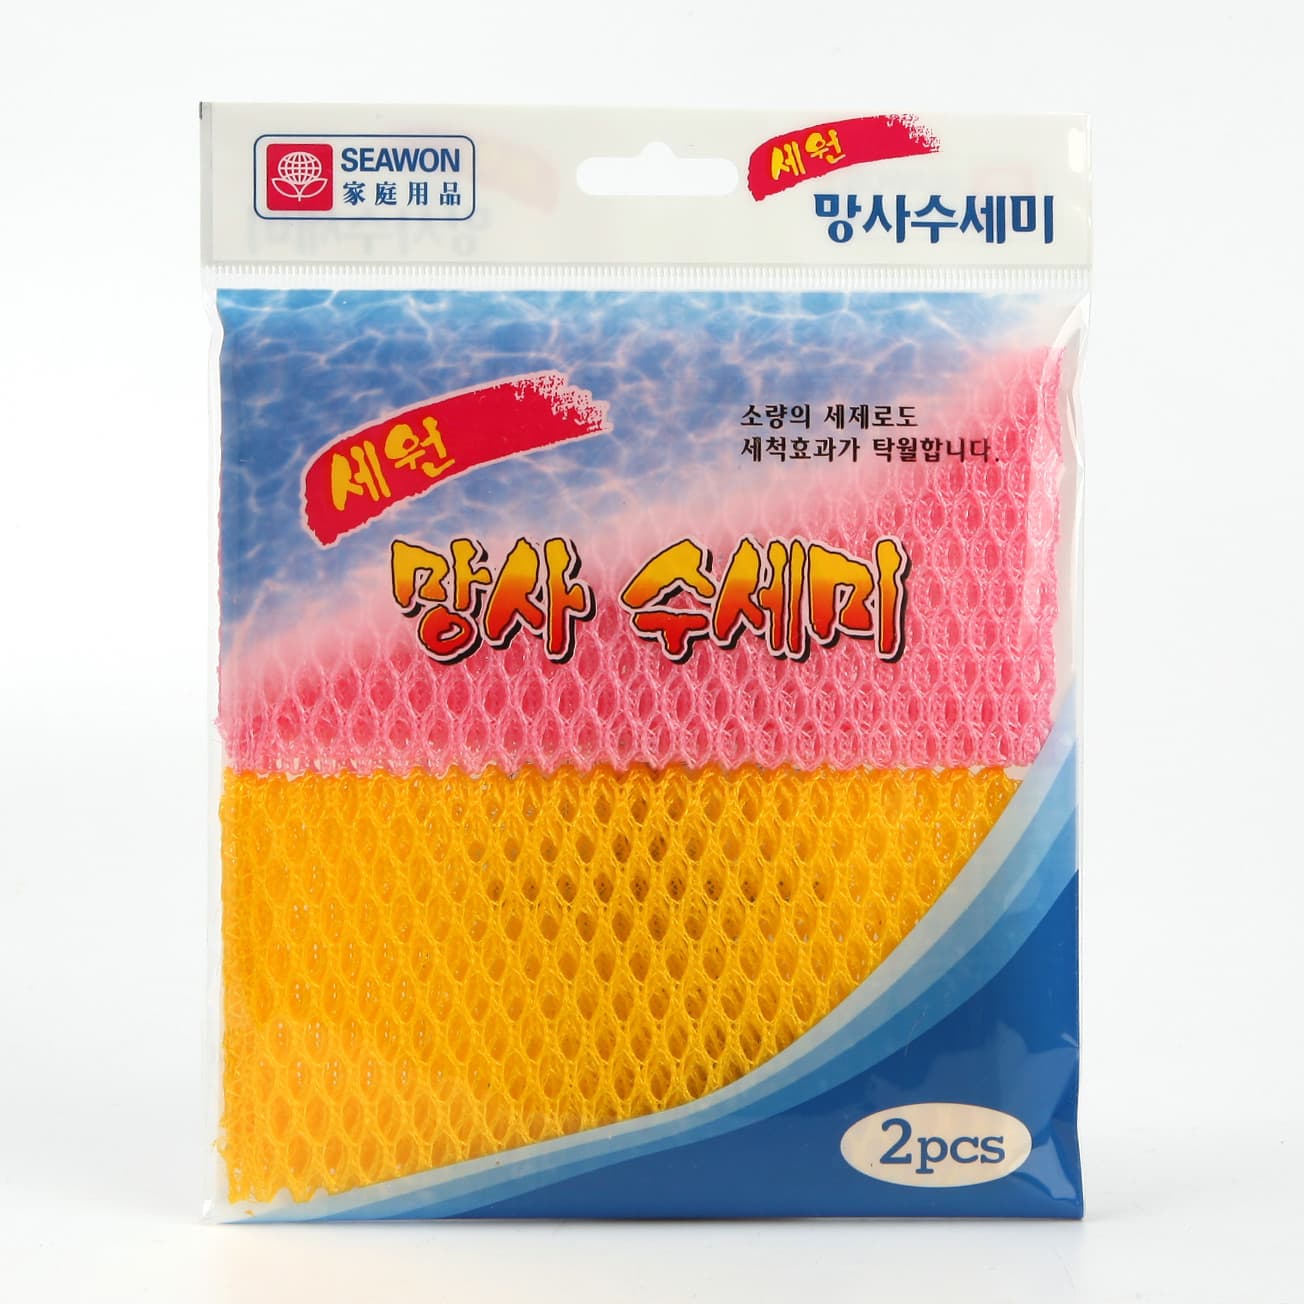 Innovative Dish Washing Net Cloths / Scourer - 100% Odor Free / Quick Dry -  No More Sponges With Mildew Smell - Perfect Scrubber For Washing Dishes 